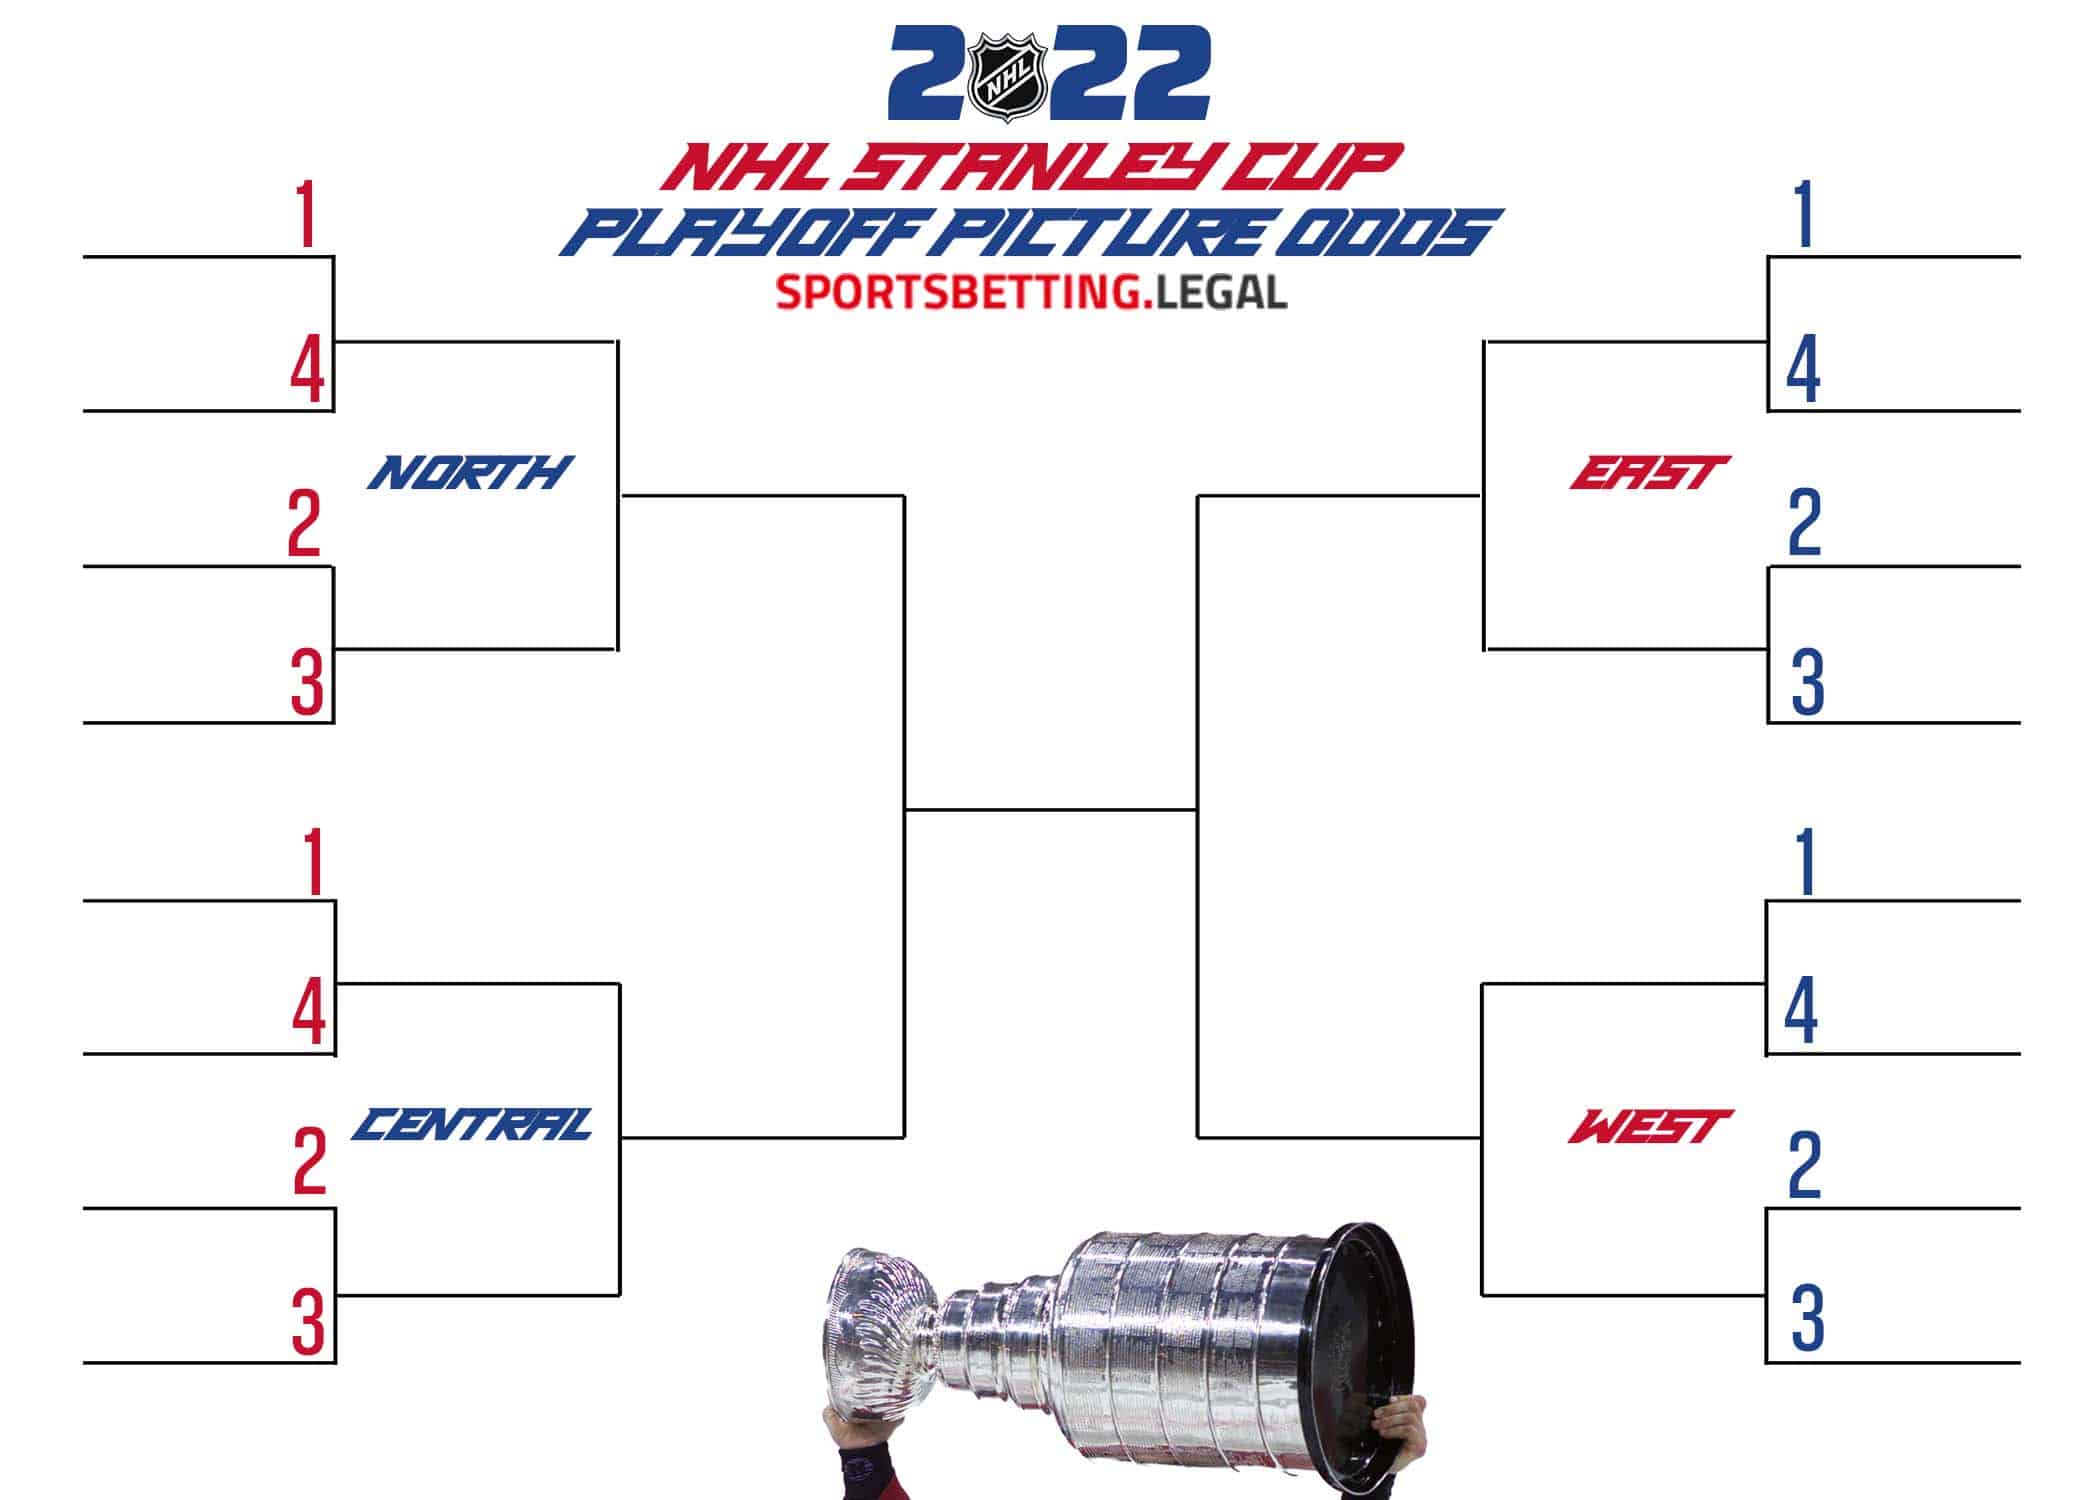 2022 NHL Playoff picture